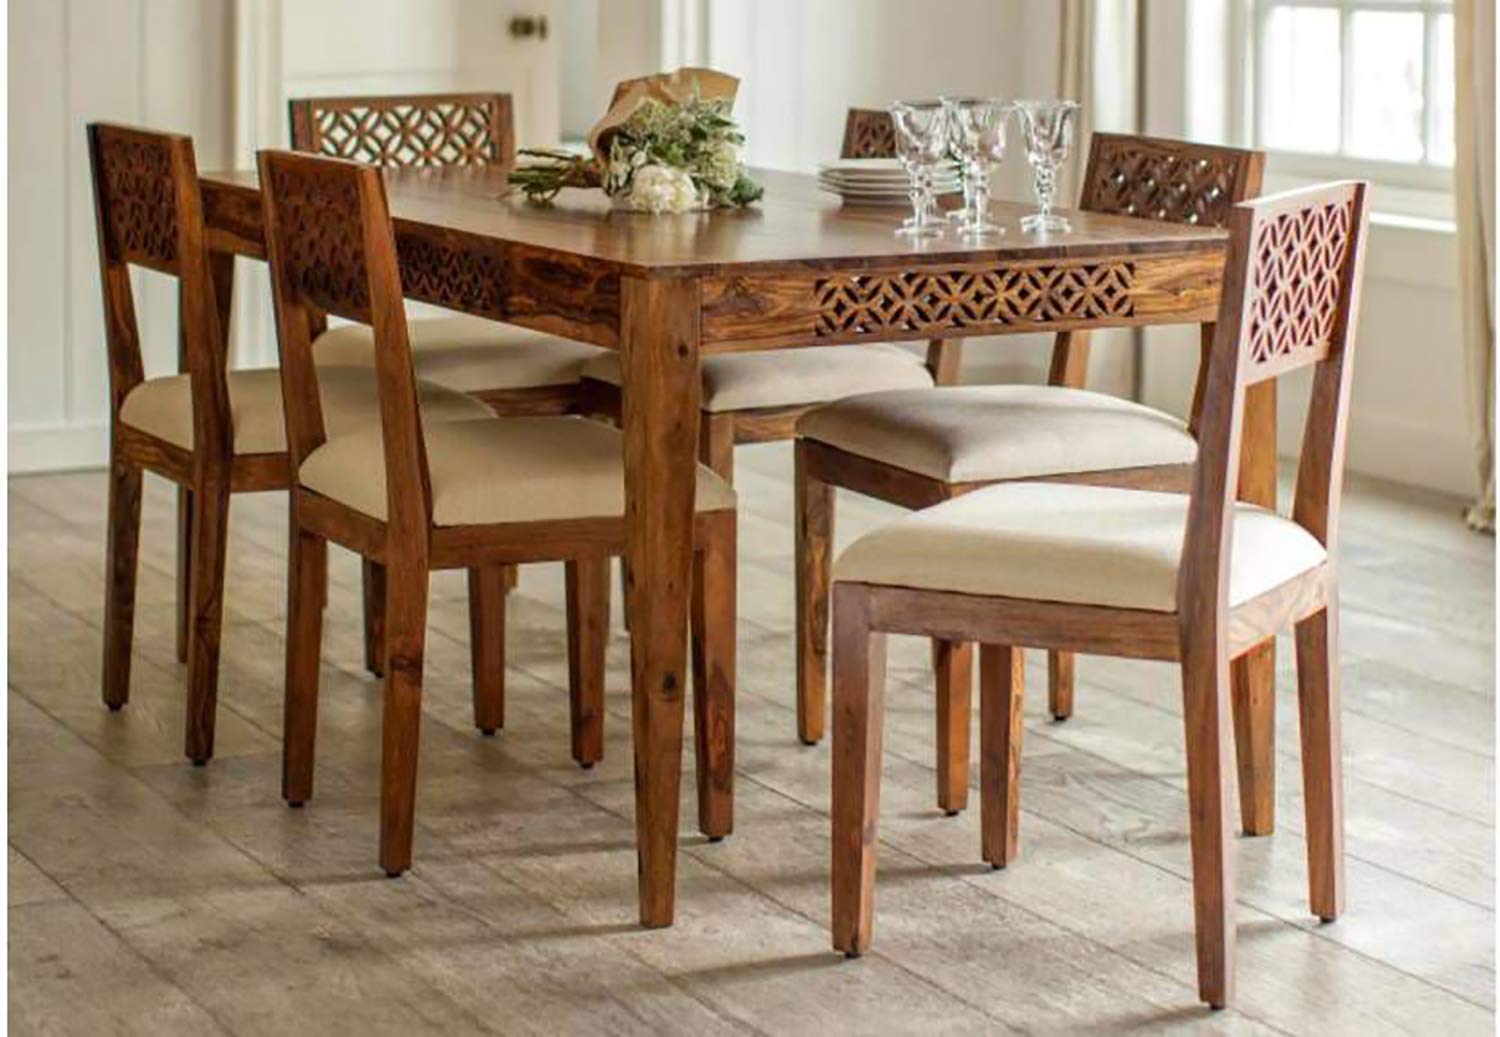 Amazon Navratri Sale: Huge Discount On Branded Dining Tables, Prices Start At Just Rs 12,000